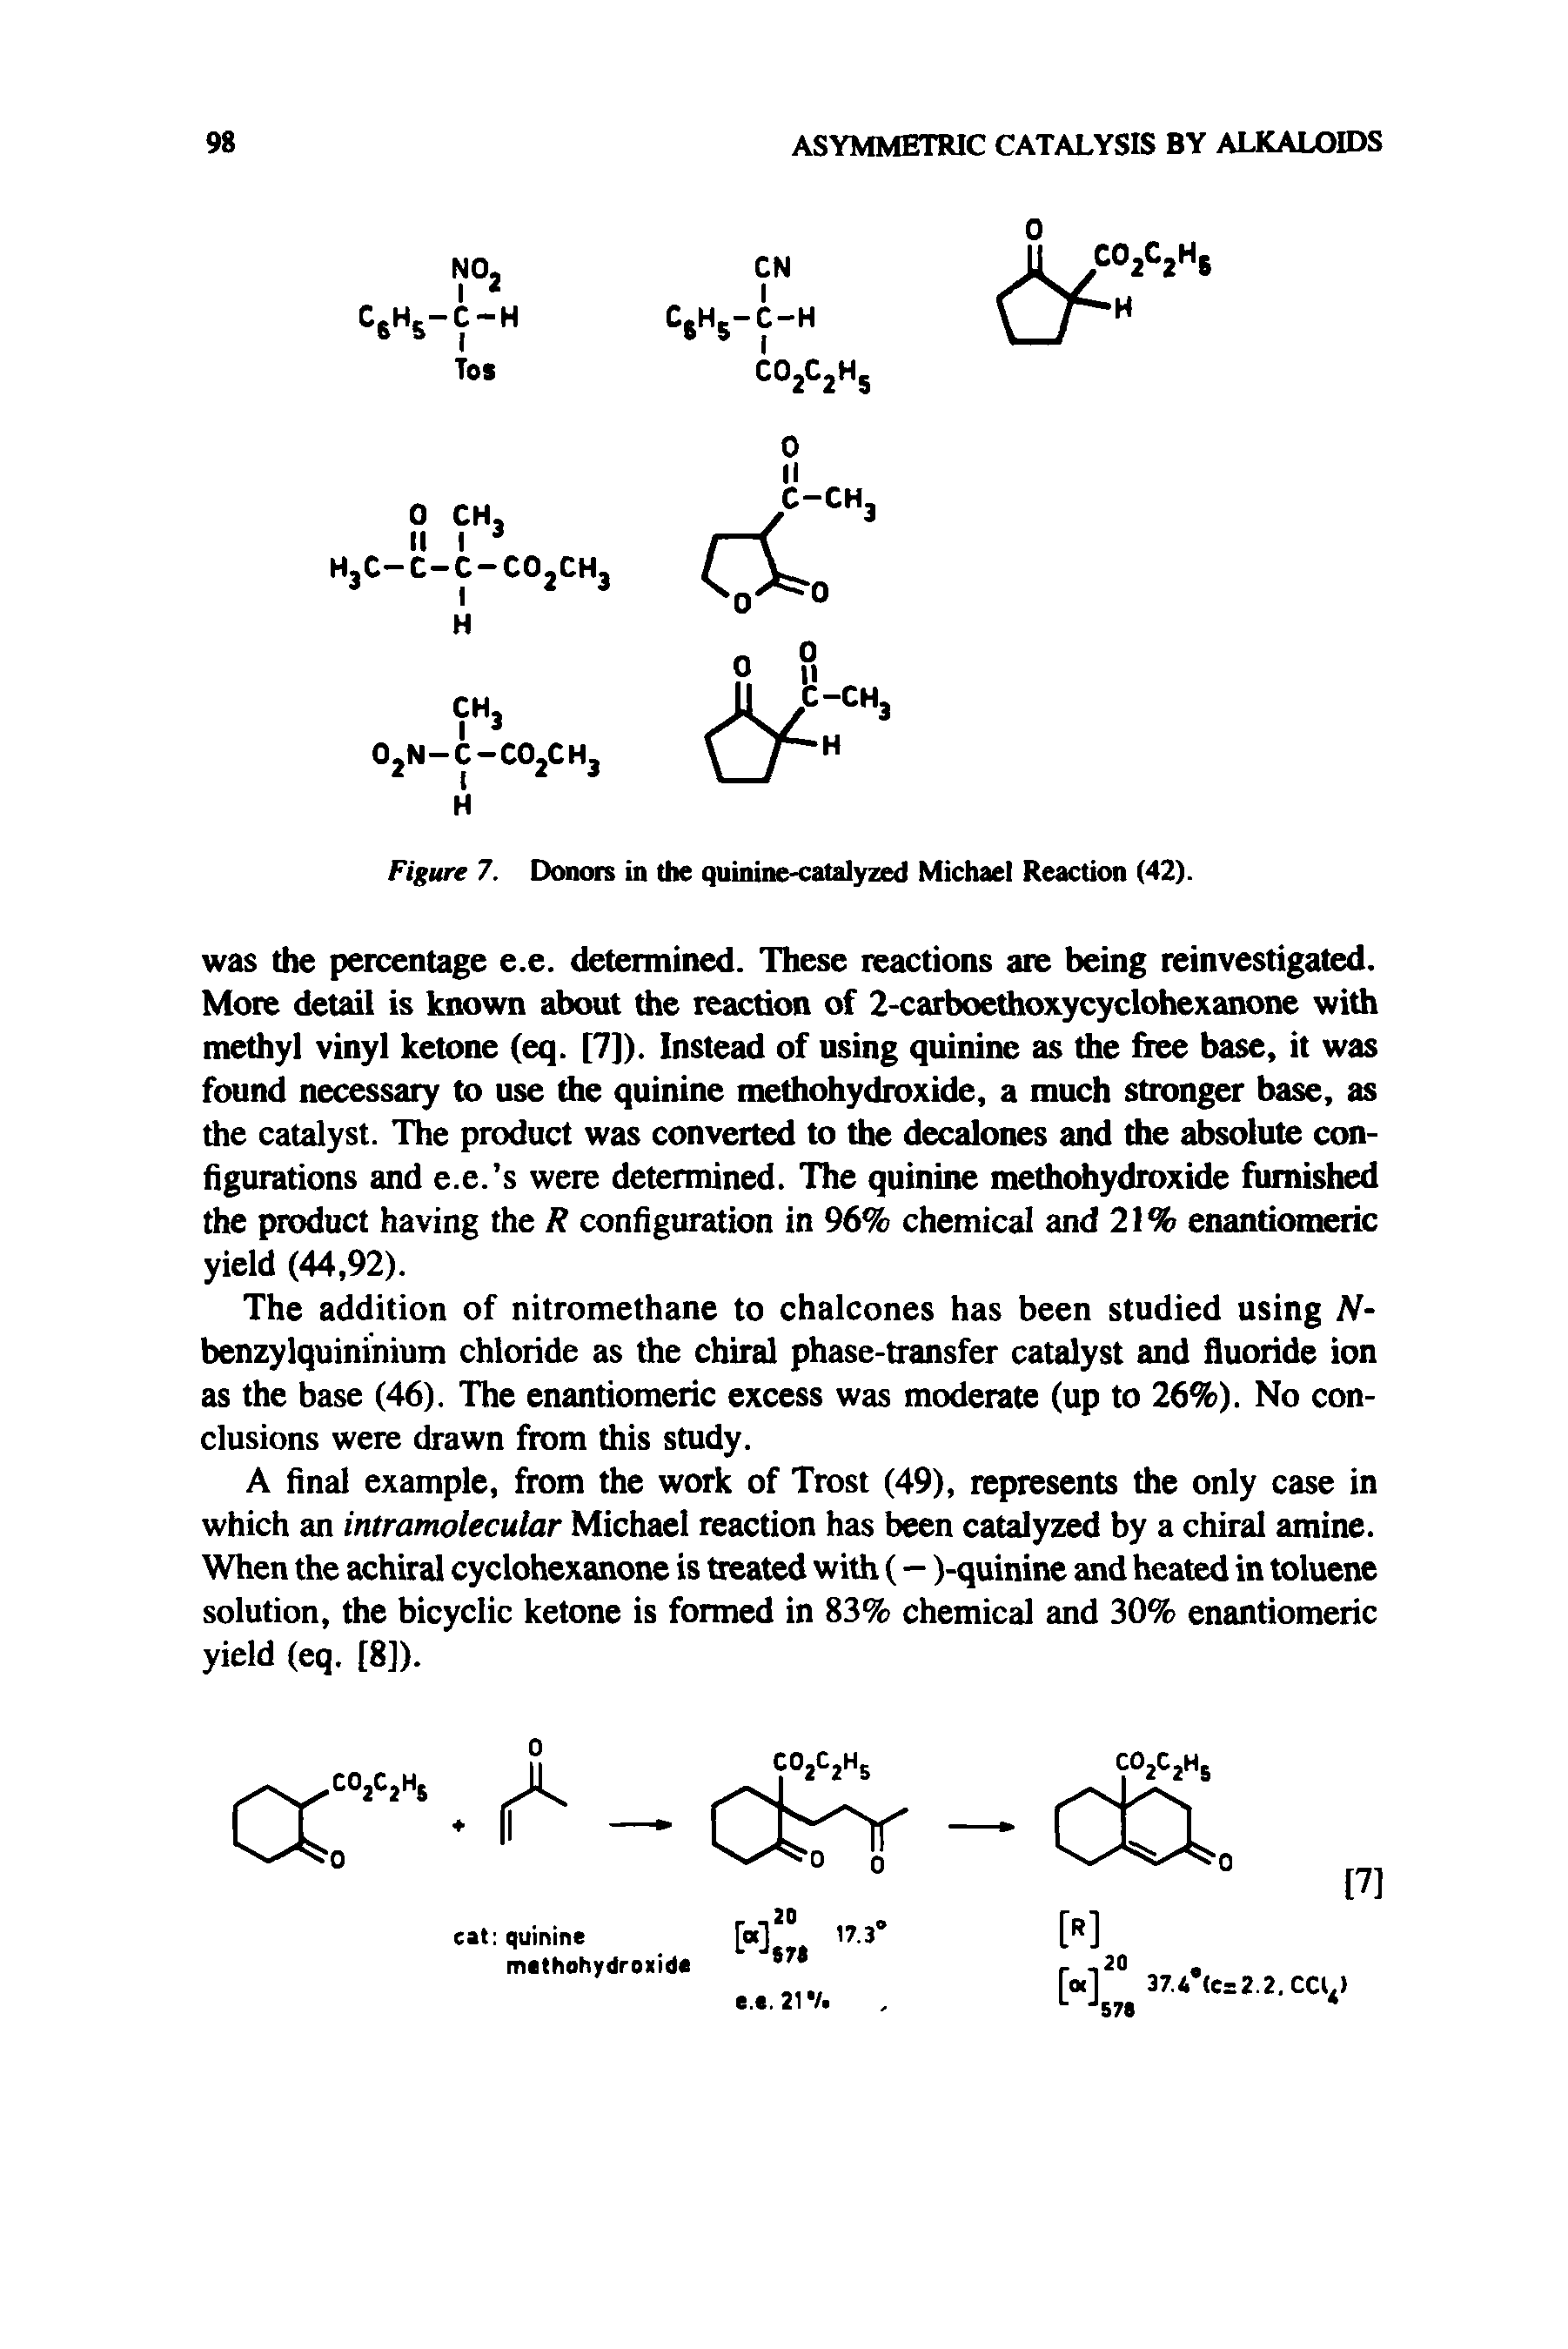 Figure 7. Donors in the quinine-catalyzed Michael Reaction (42).